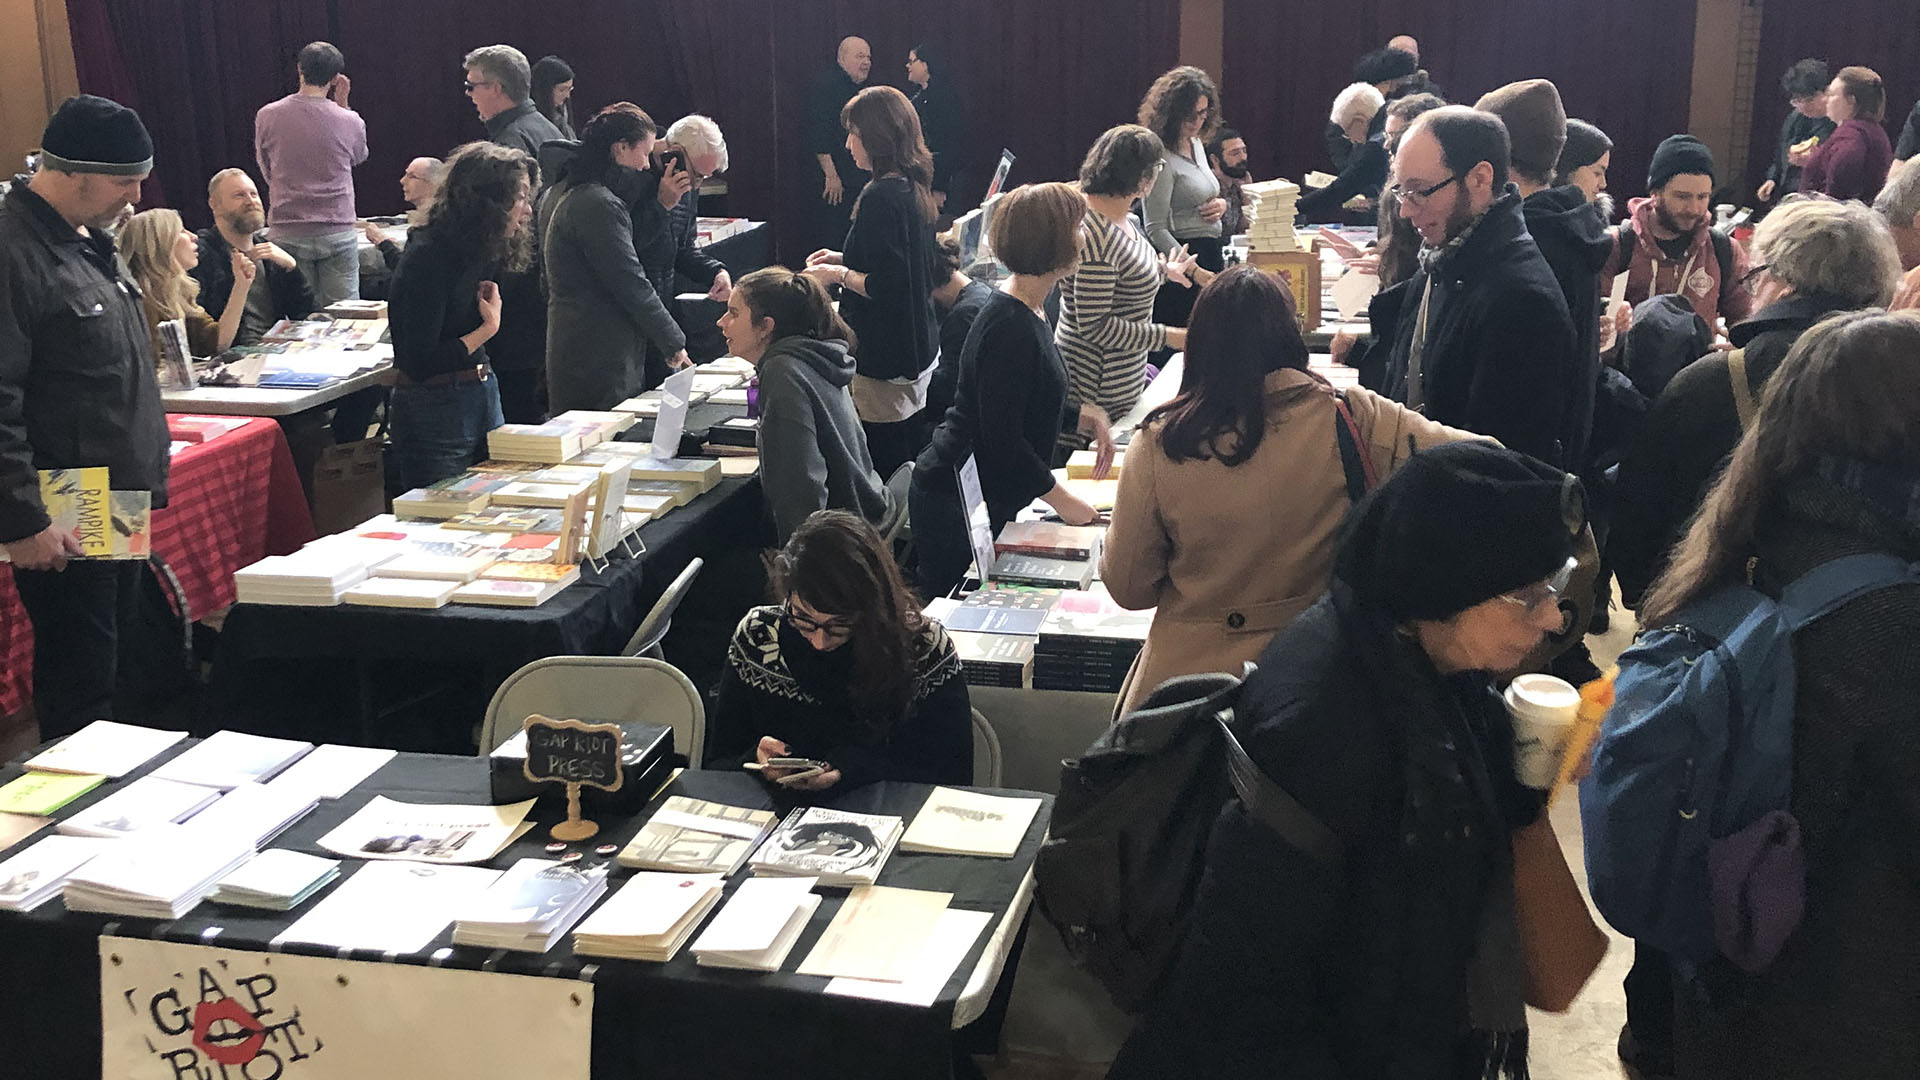 Small Press Market image - features people grouped around different tables from different small presses